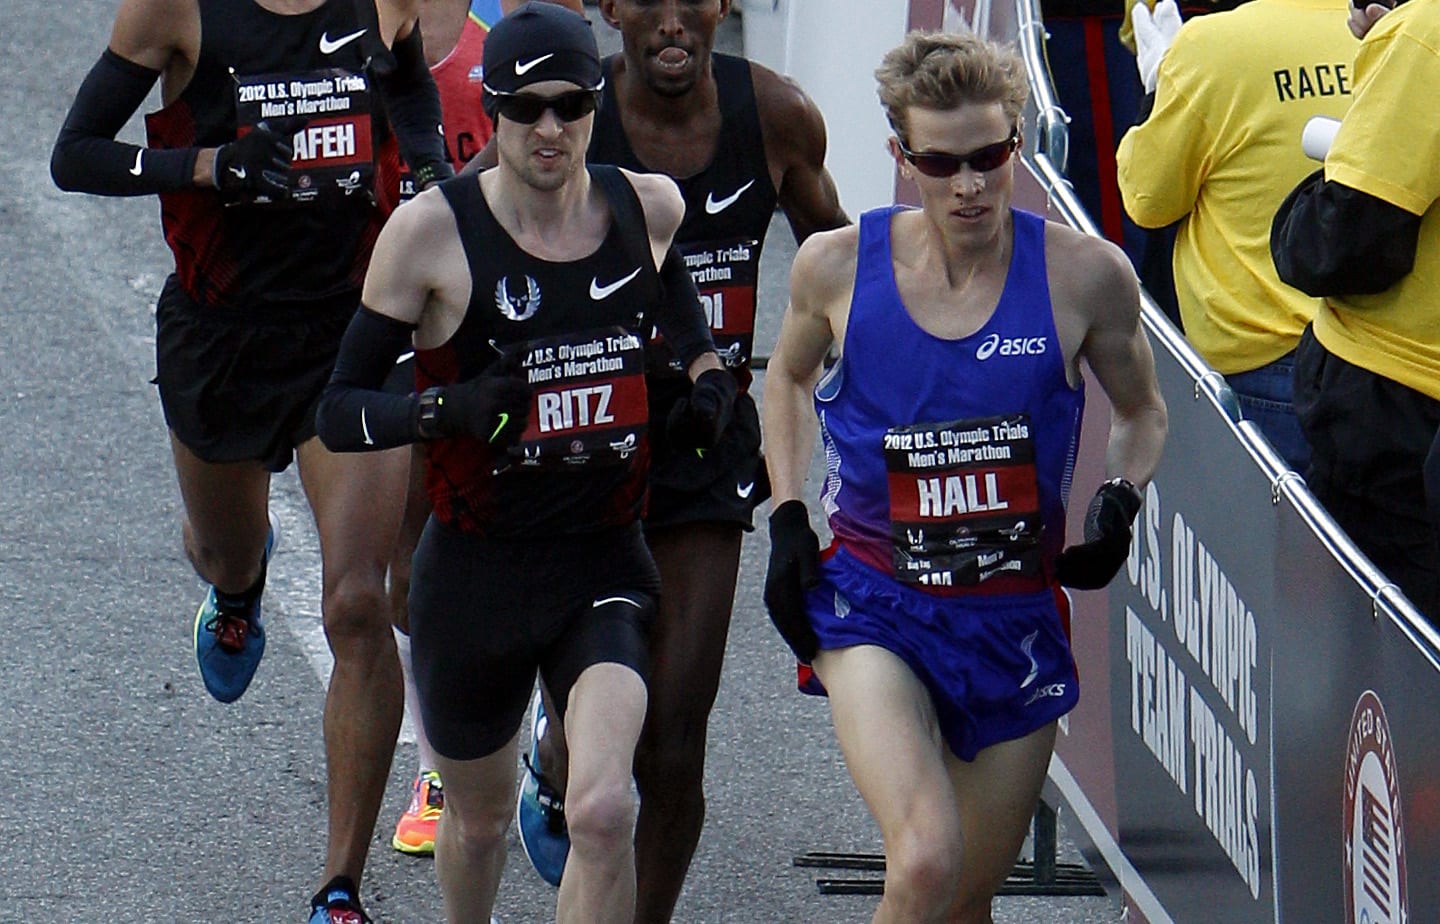 Ryan Hall (front) during U.S. Marathon Olympic Trials in 2012.